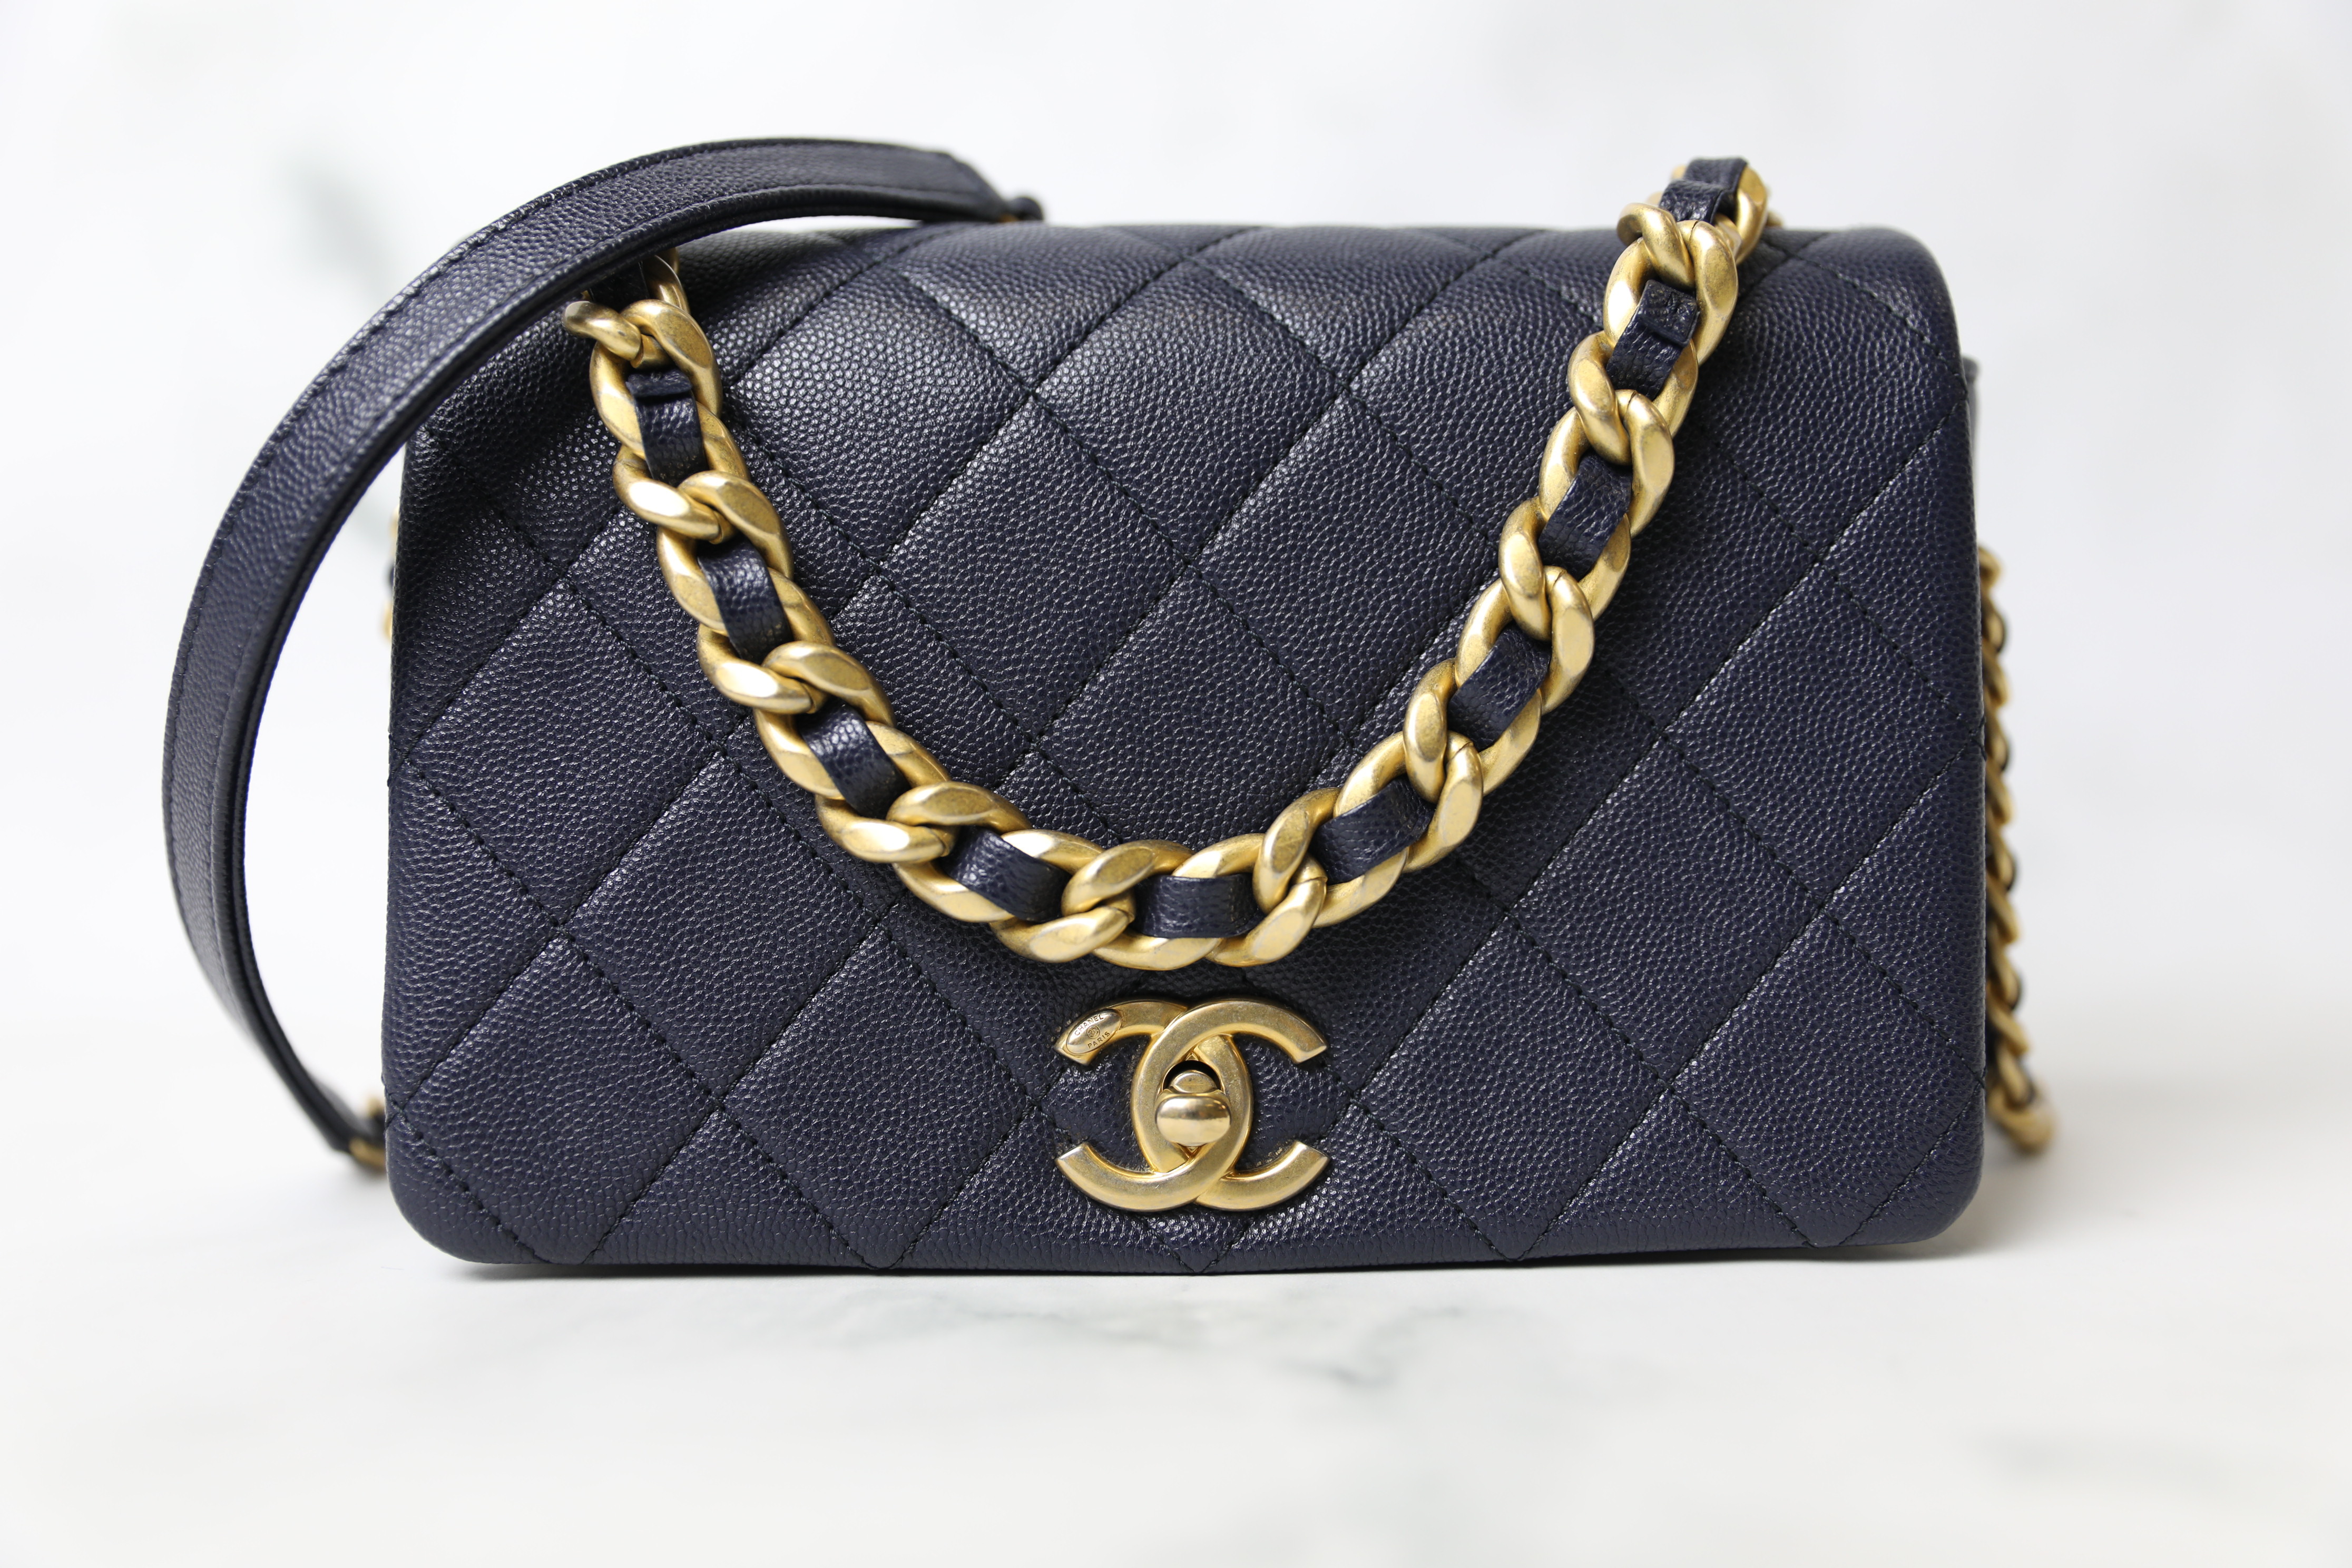 Chanel Fashion Therapy Small, Navy Caviar with Gold Hardware, As New in Box  WA001 - Julia Rose Boston